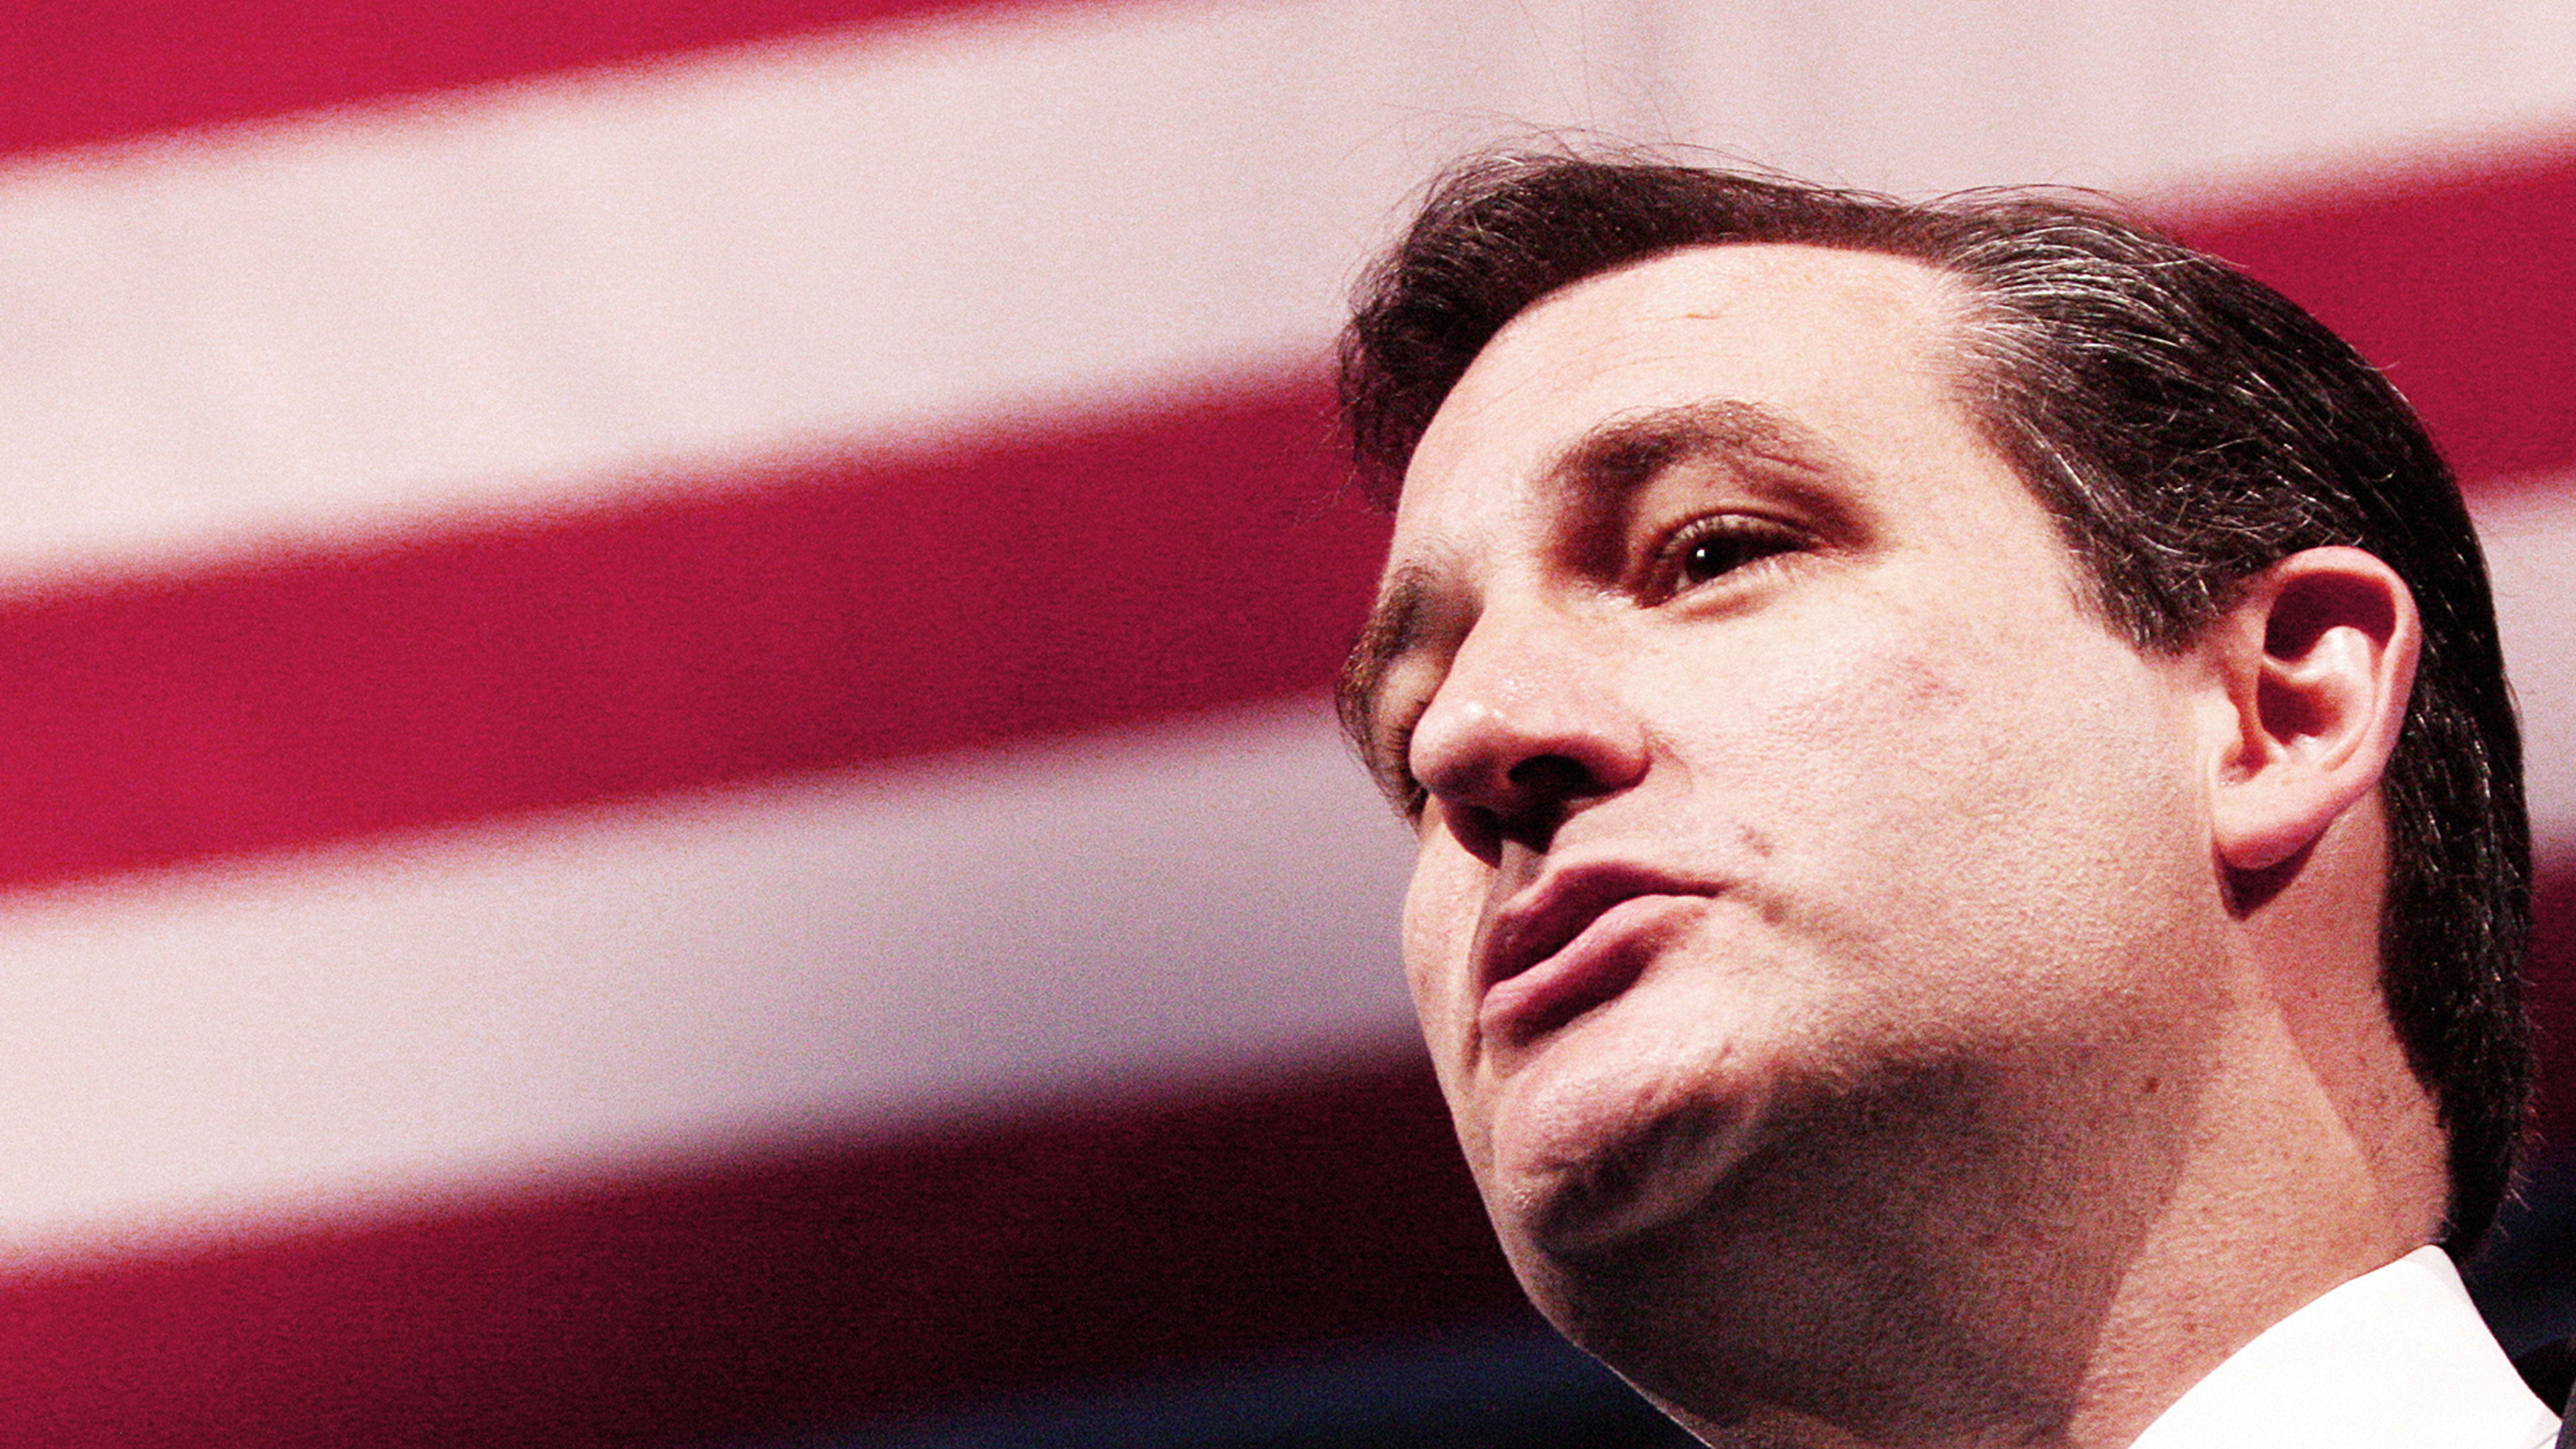 Ted Cruz’s Claim That “Obamacare Is A Job Killer” Debunked By Fact-Checkers